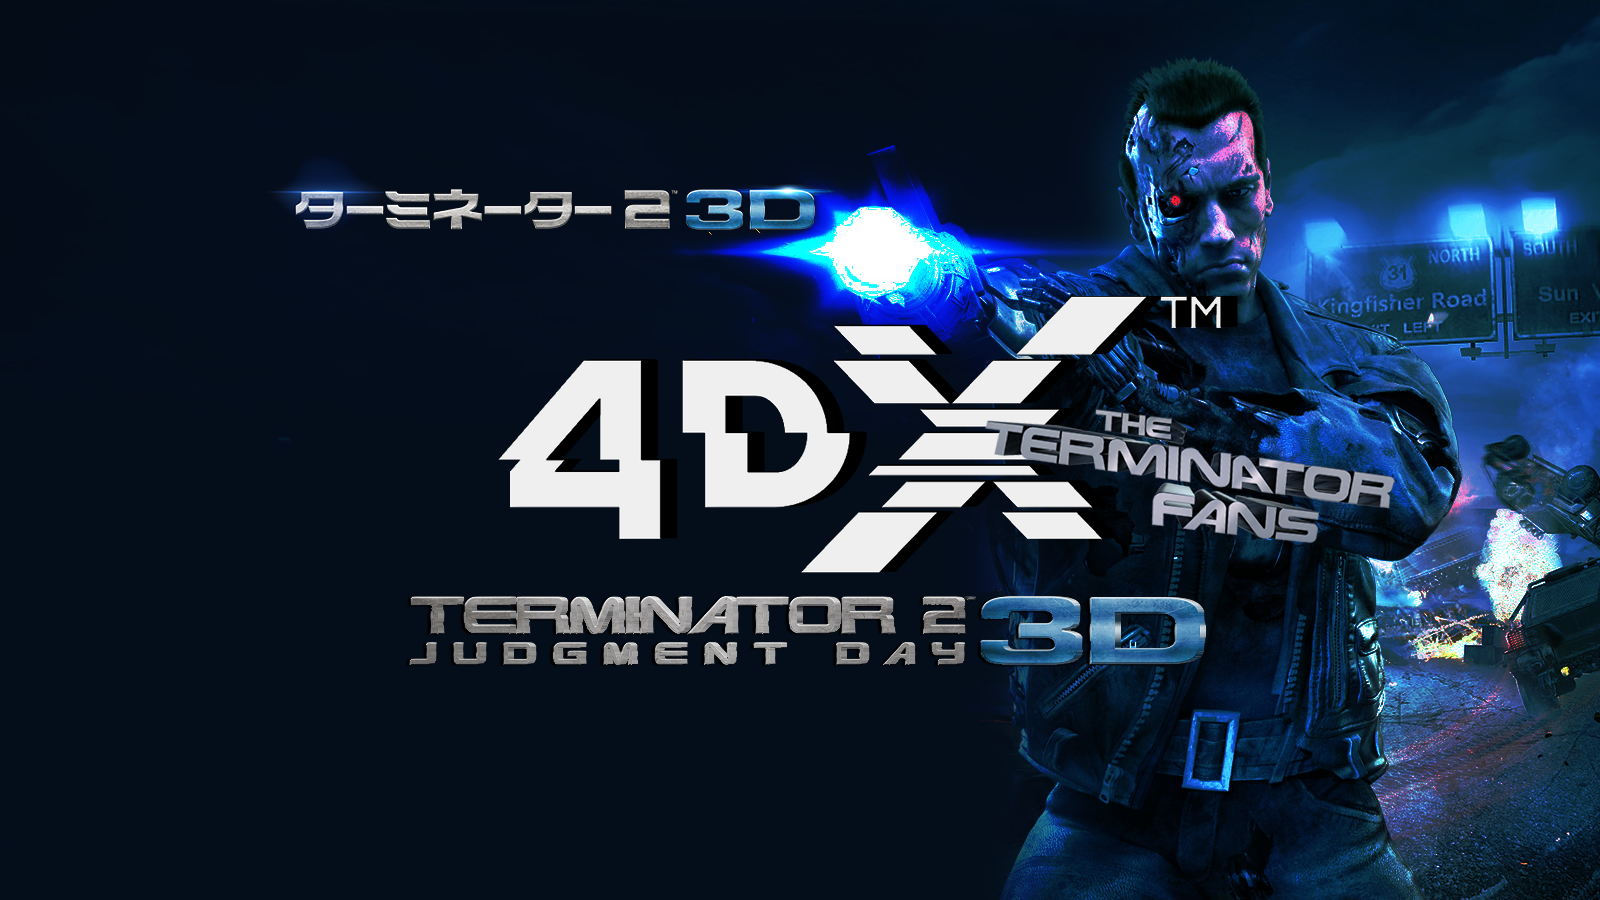 Terminator 2 3d 4dx Screenings In Japan And 4dx Explained Theterminatorfans Com